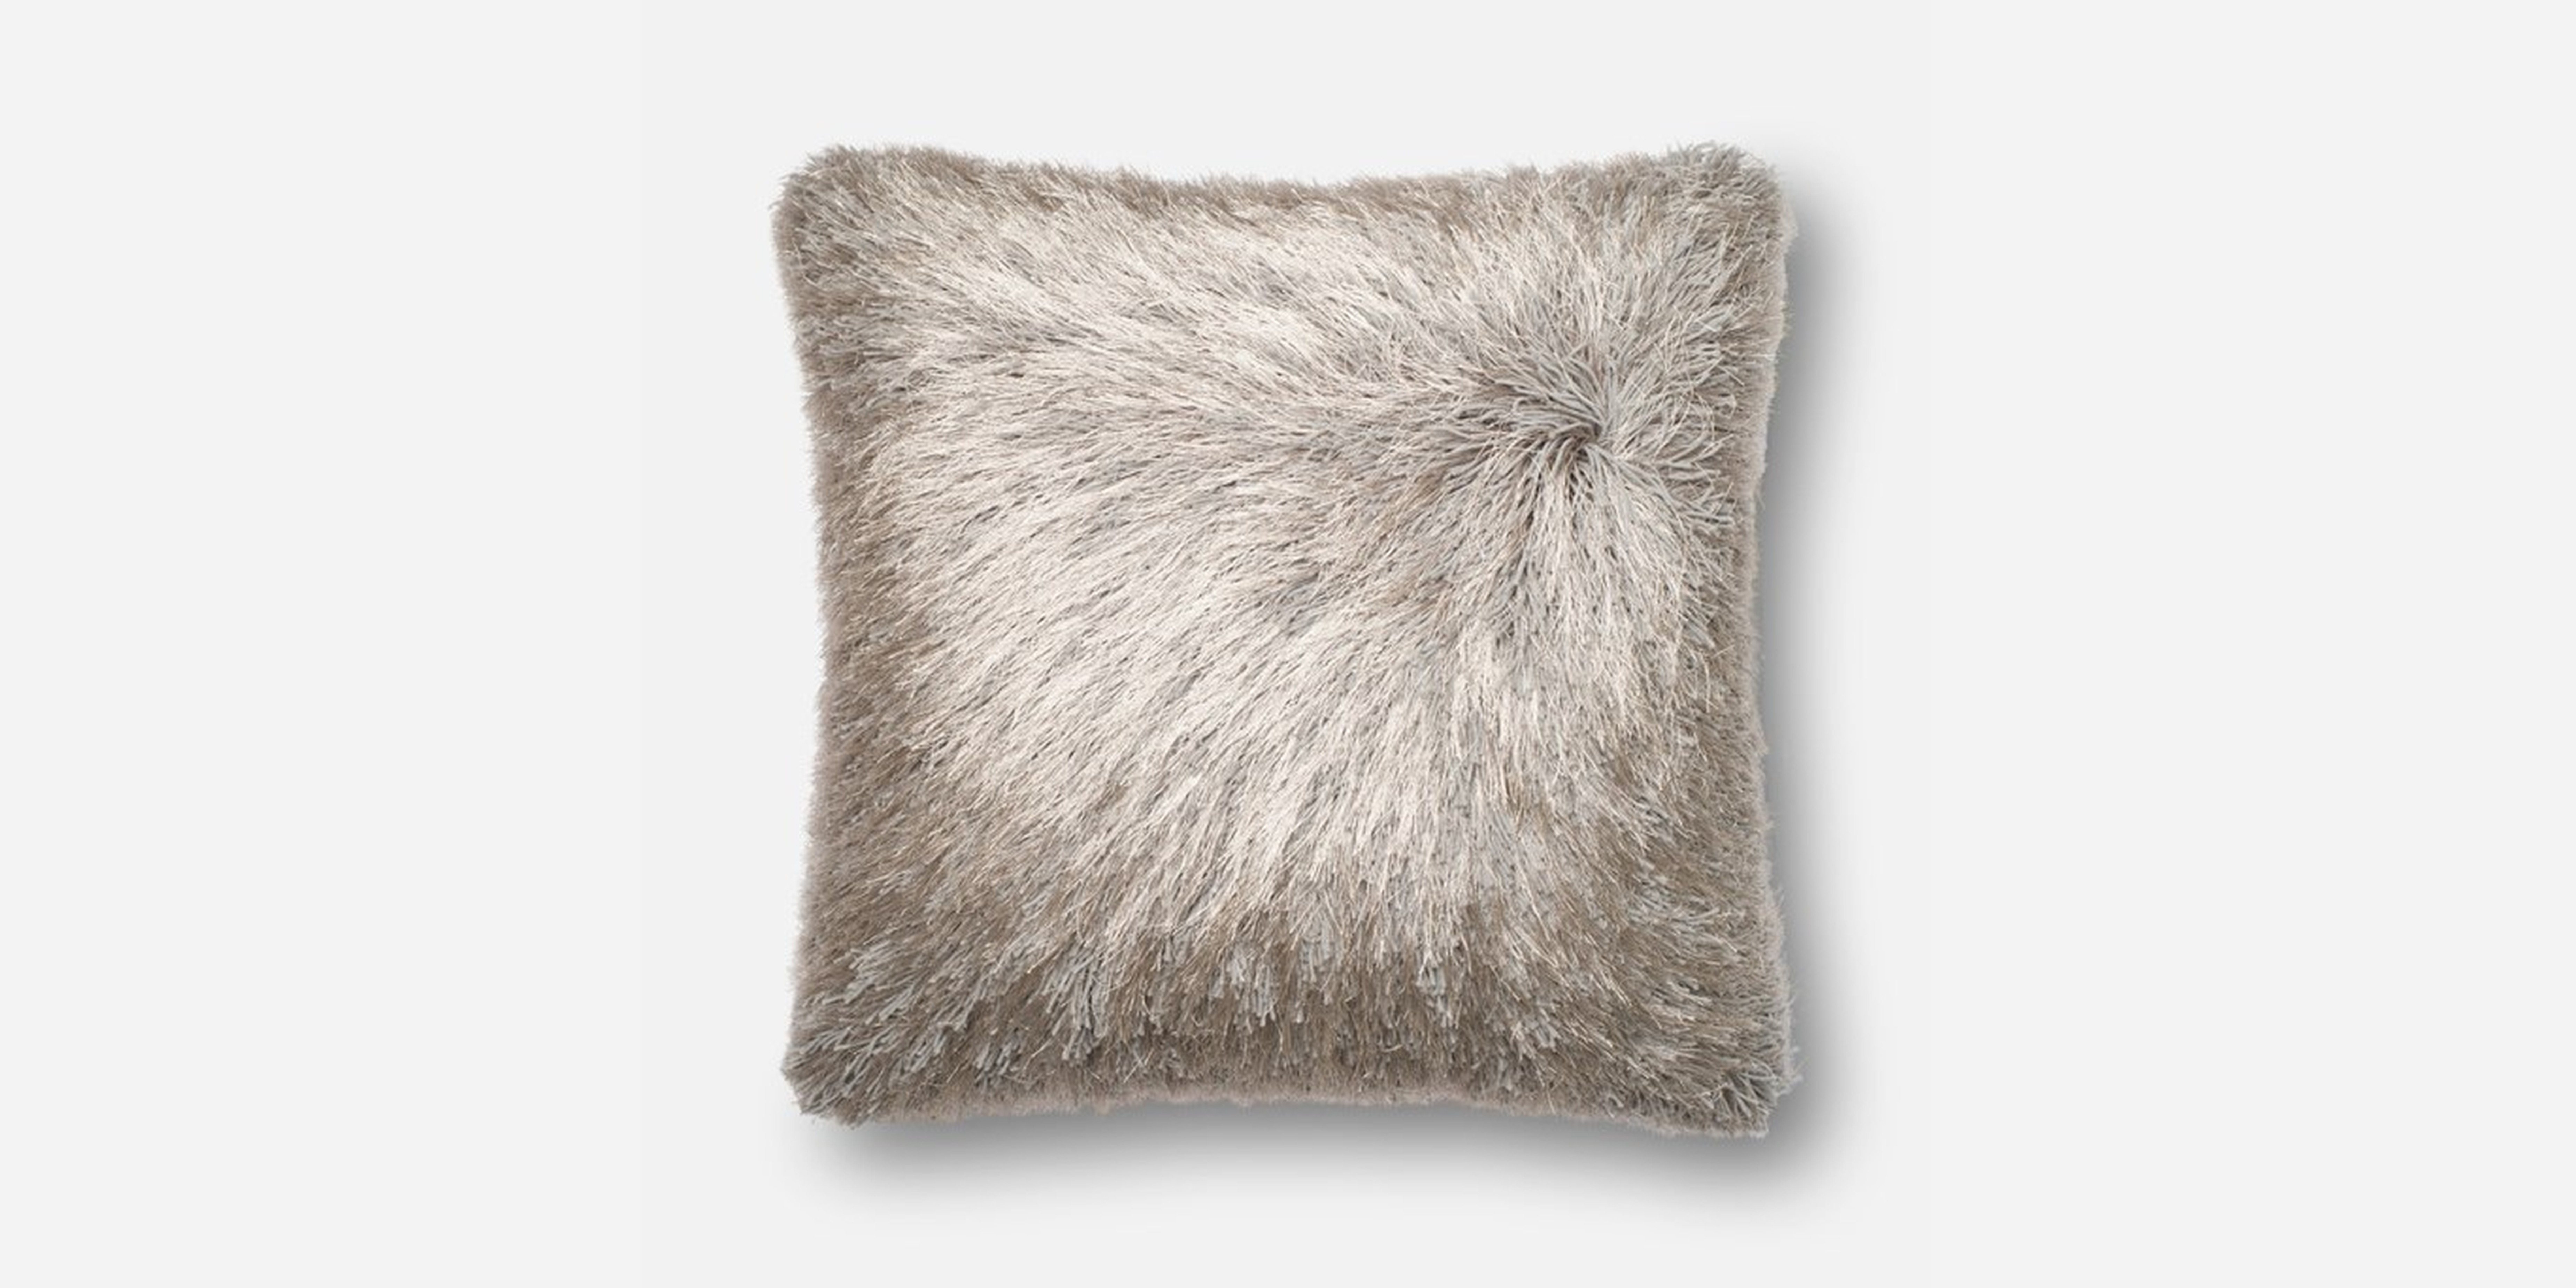 P0245 SILVER Pillow - 22"x22" with Down Insert - 2qty order minimum - Loloi Rugs